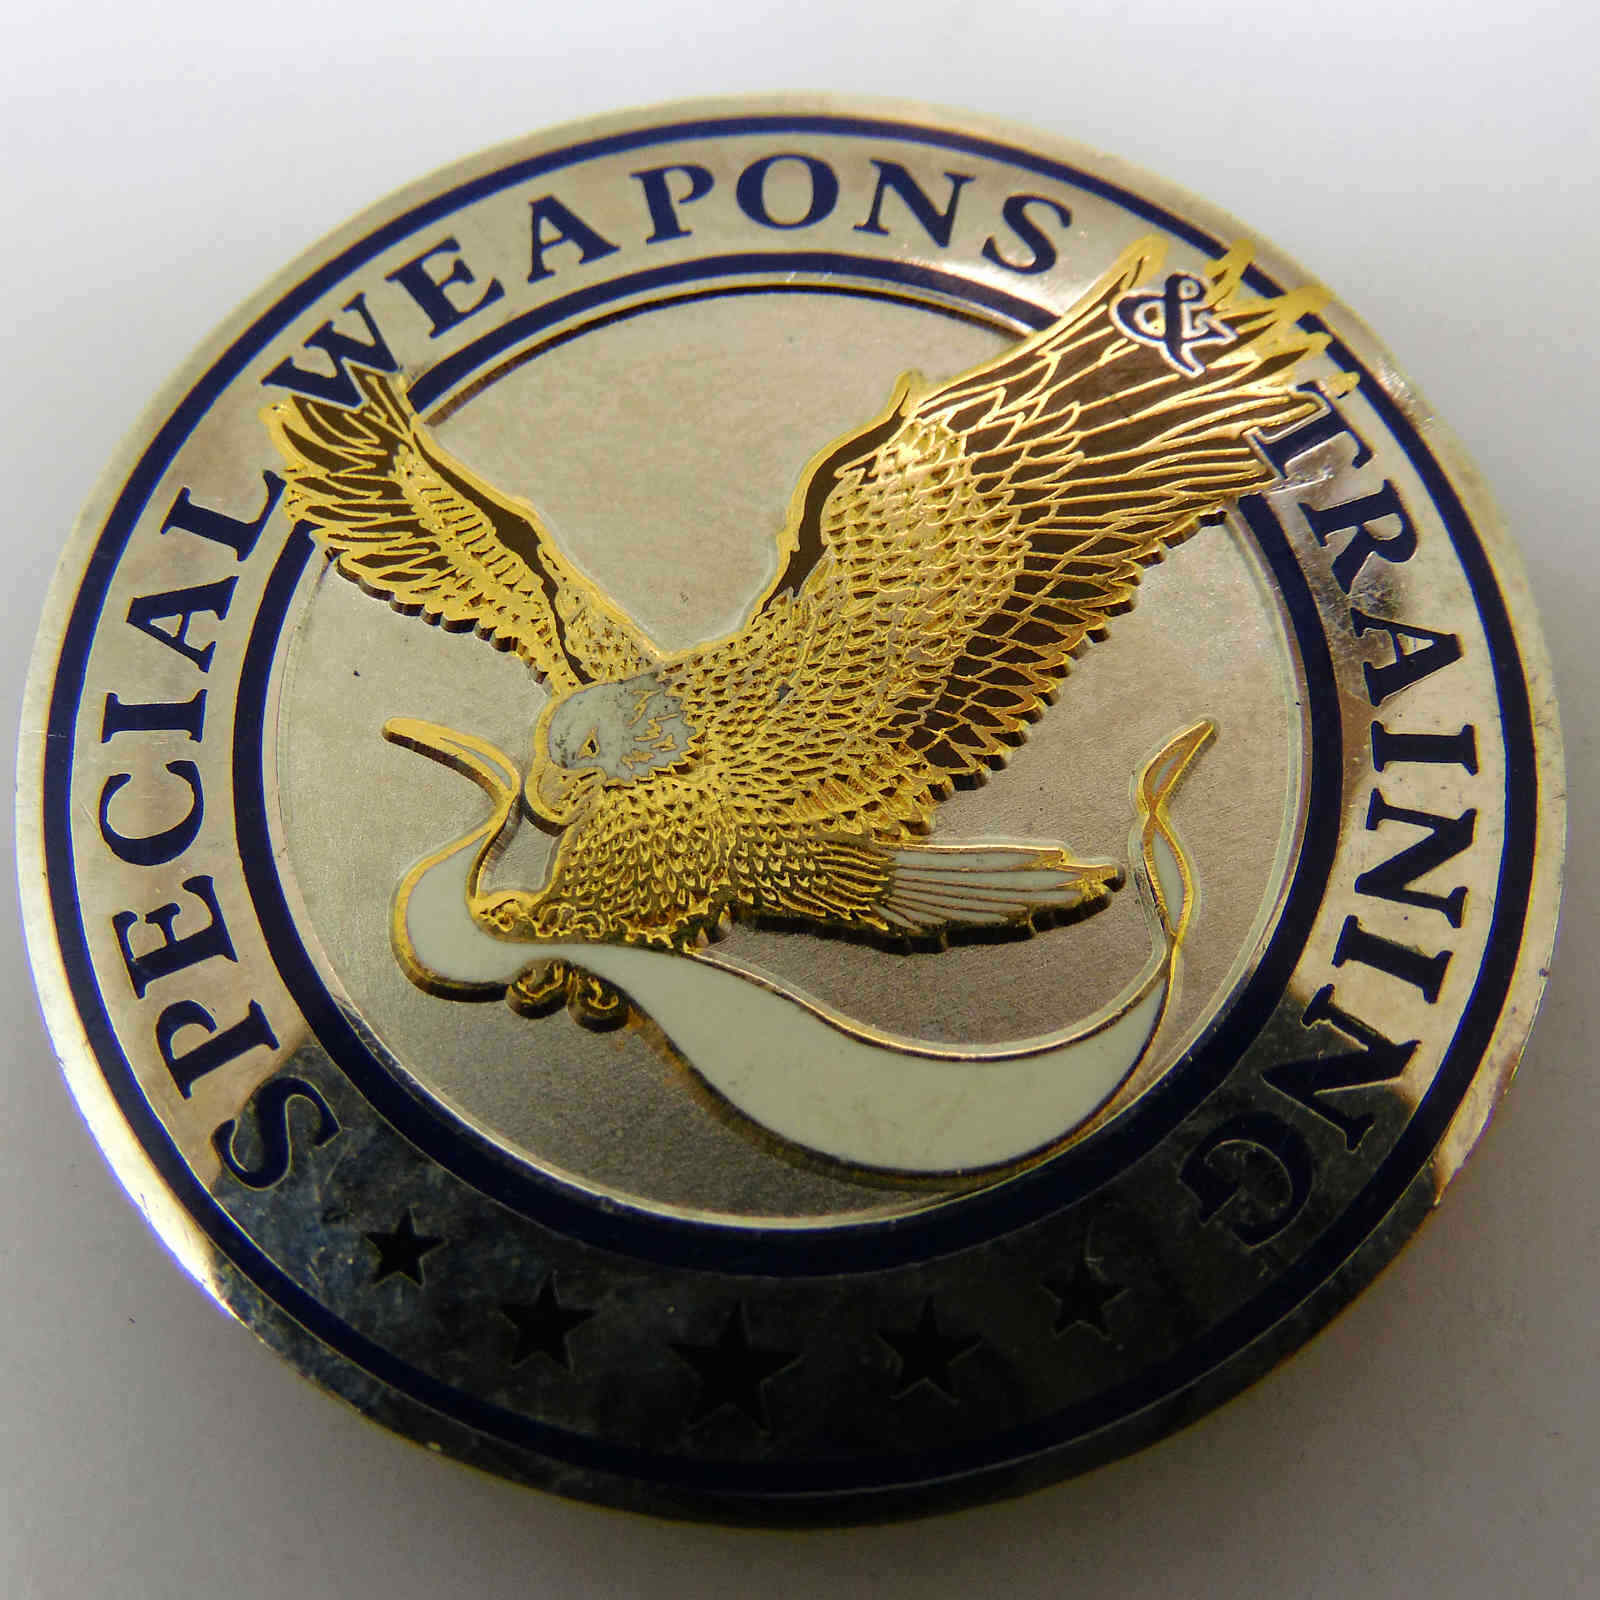 NATIONAL TRAINING CONCEPTS SPECIAL WEAPONS TRAINING CHALLENGE COIN